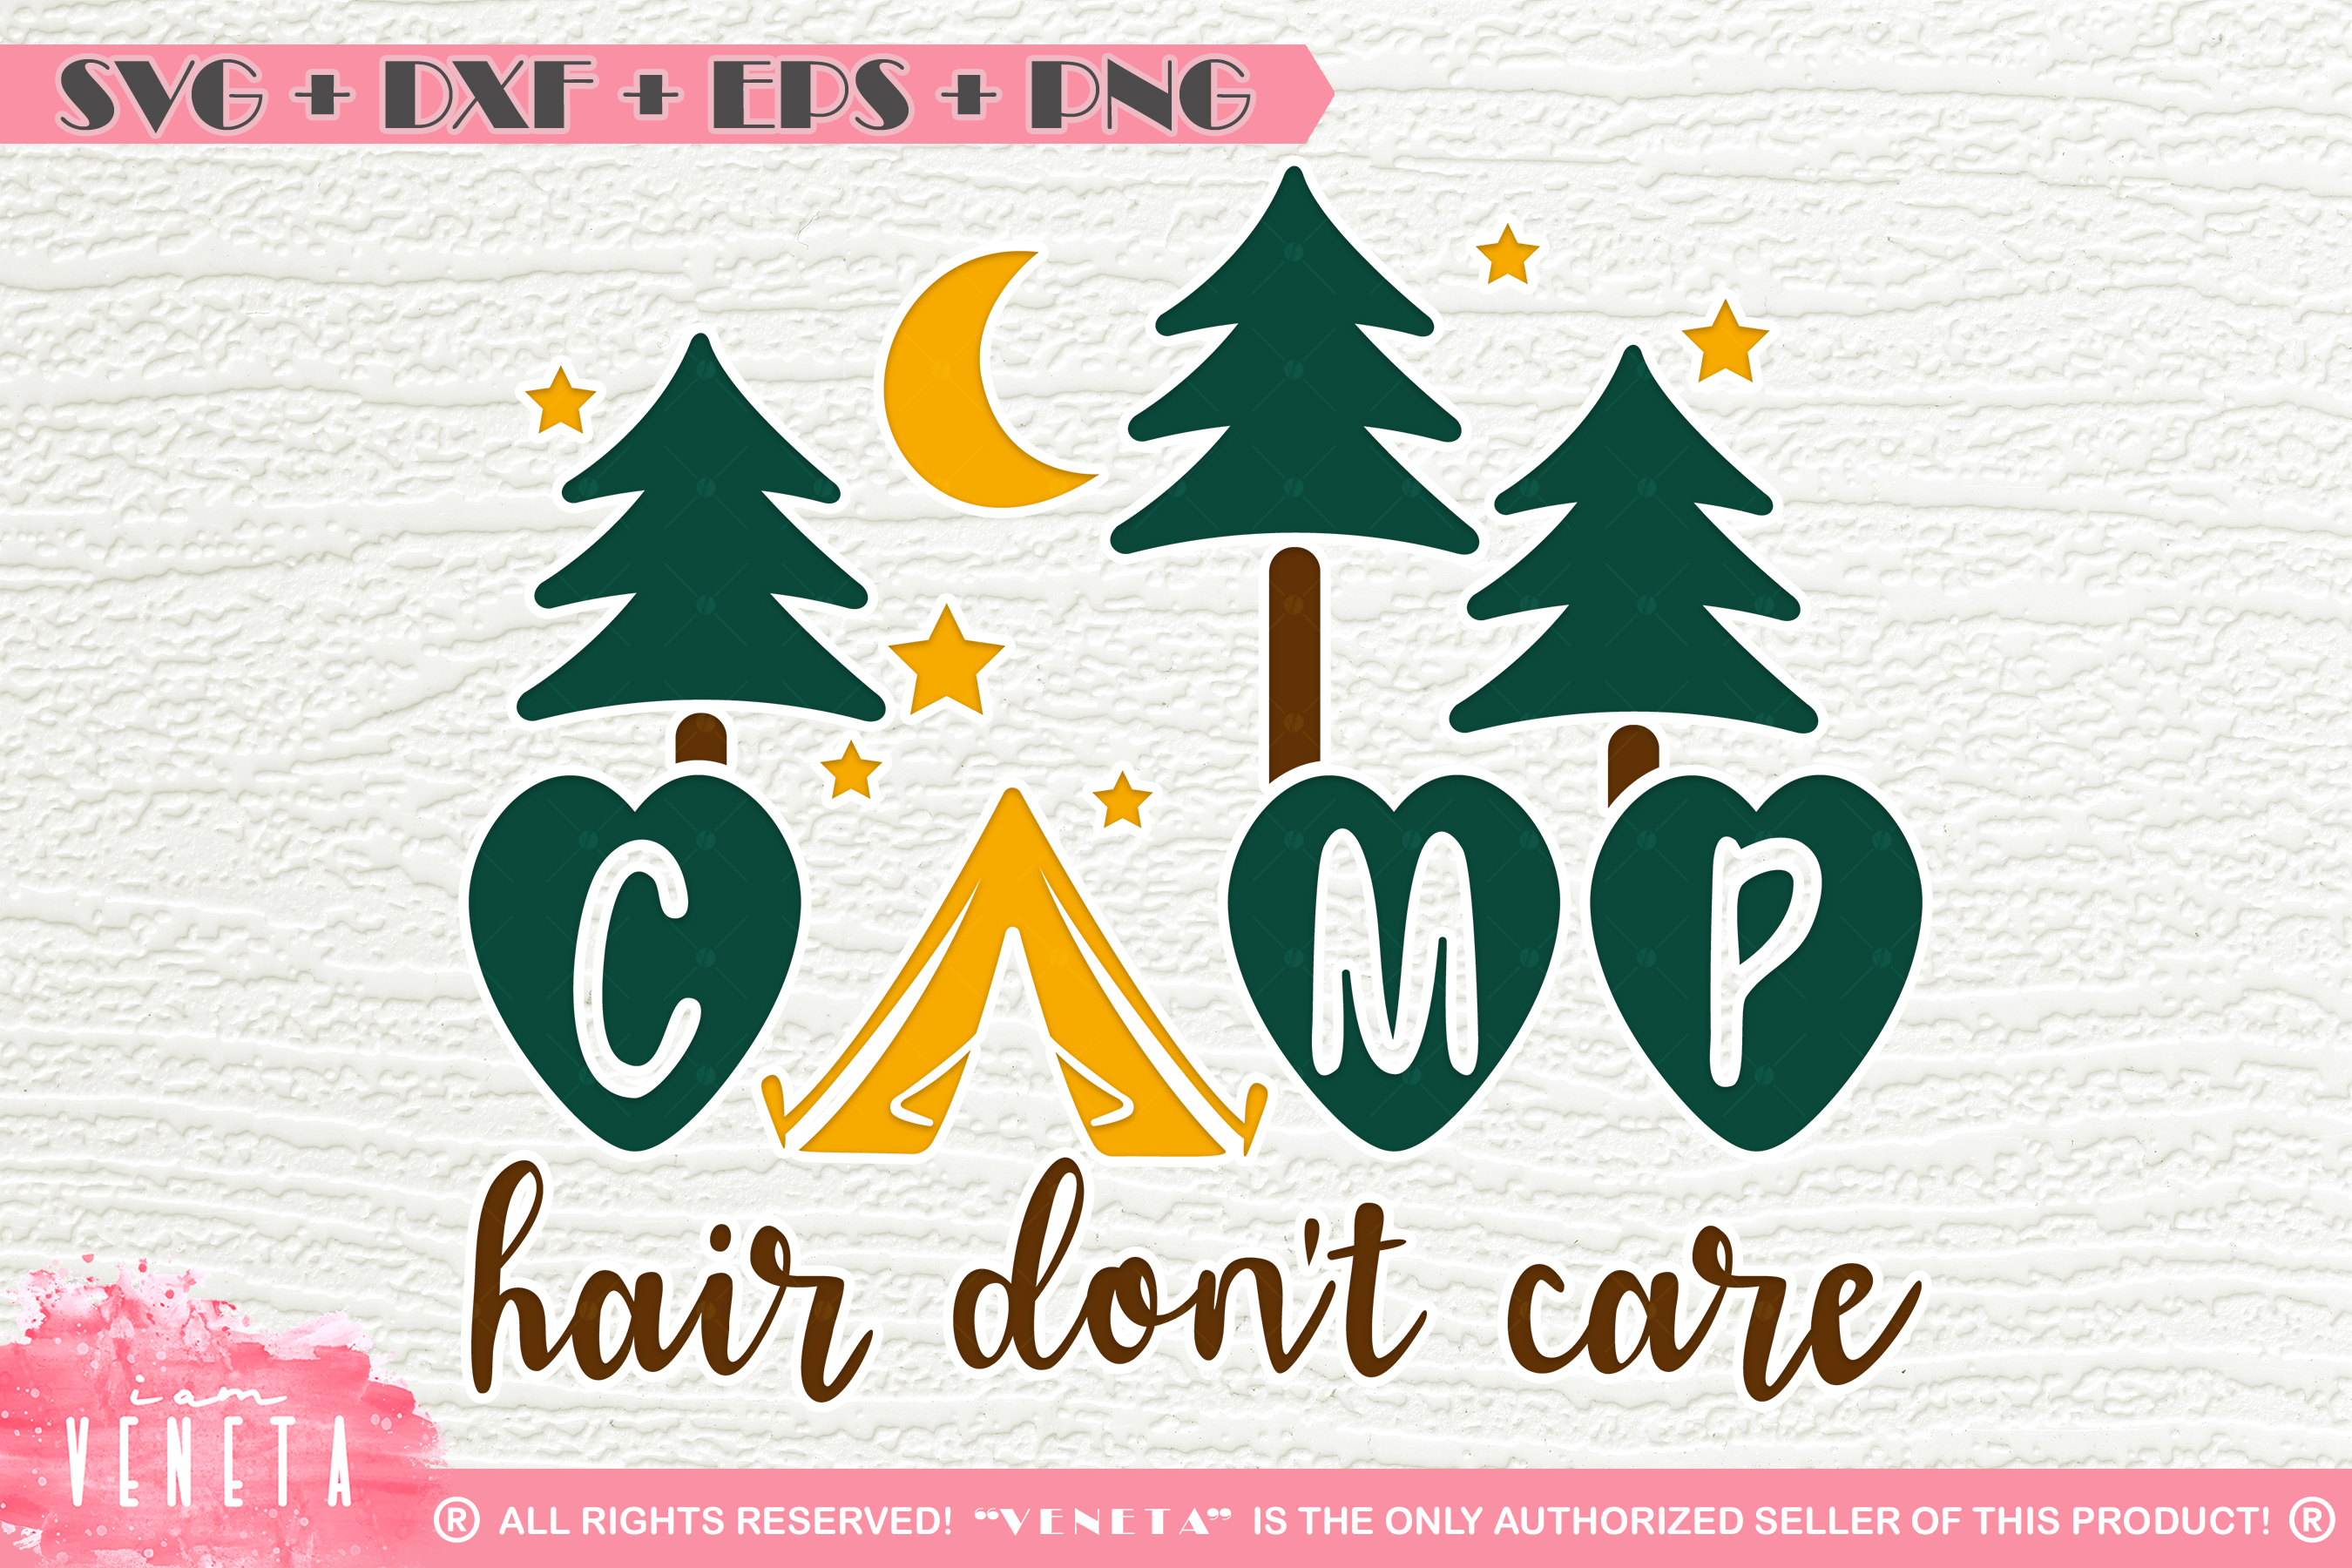 Download CAMP hair dont care | SVG, DXF, EPS, PNG Cutting File